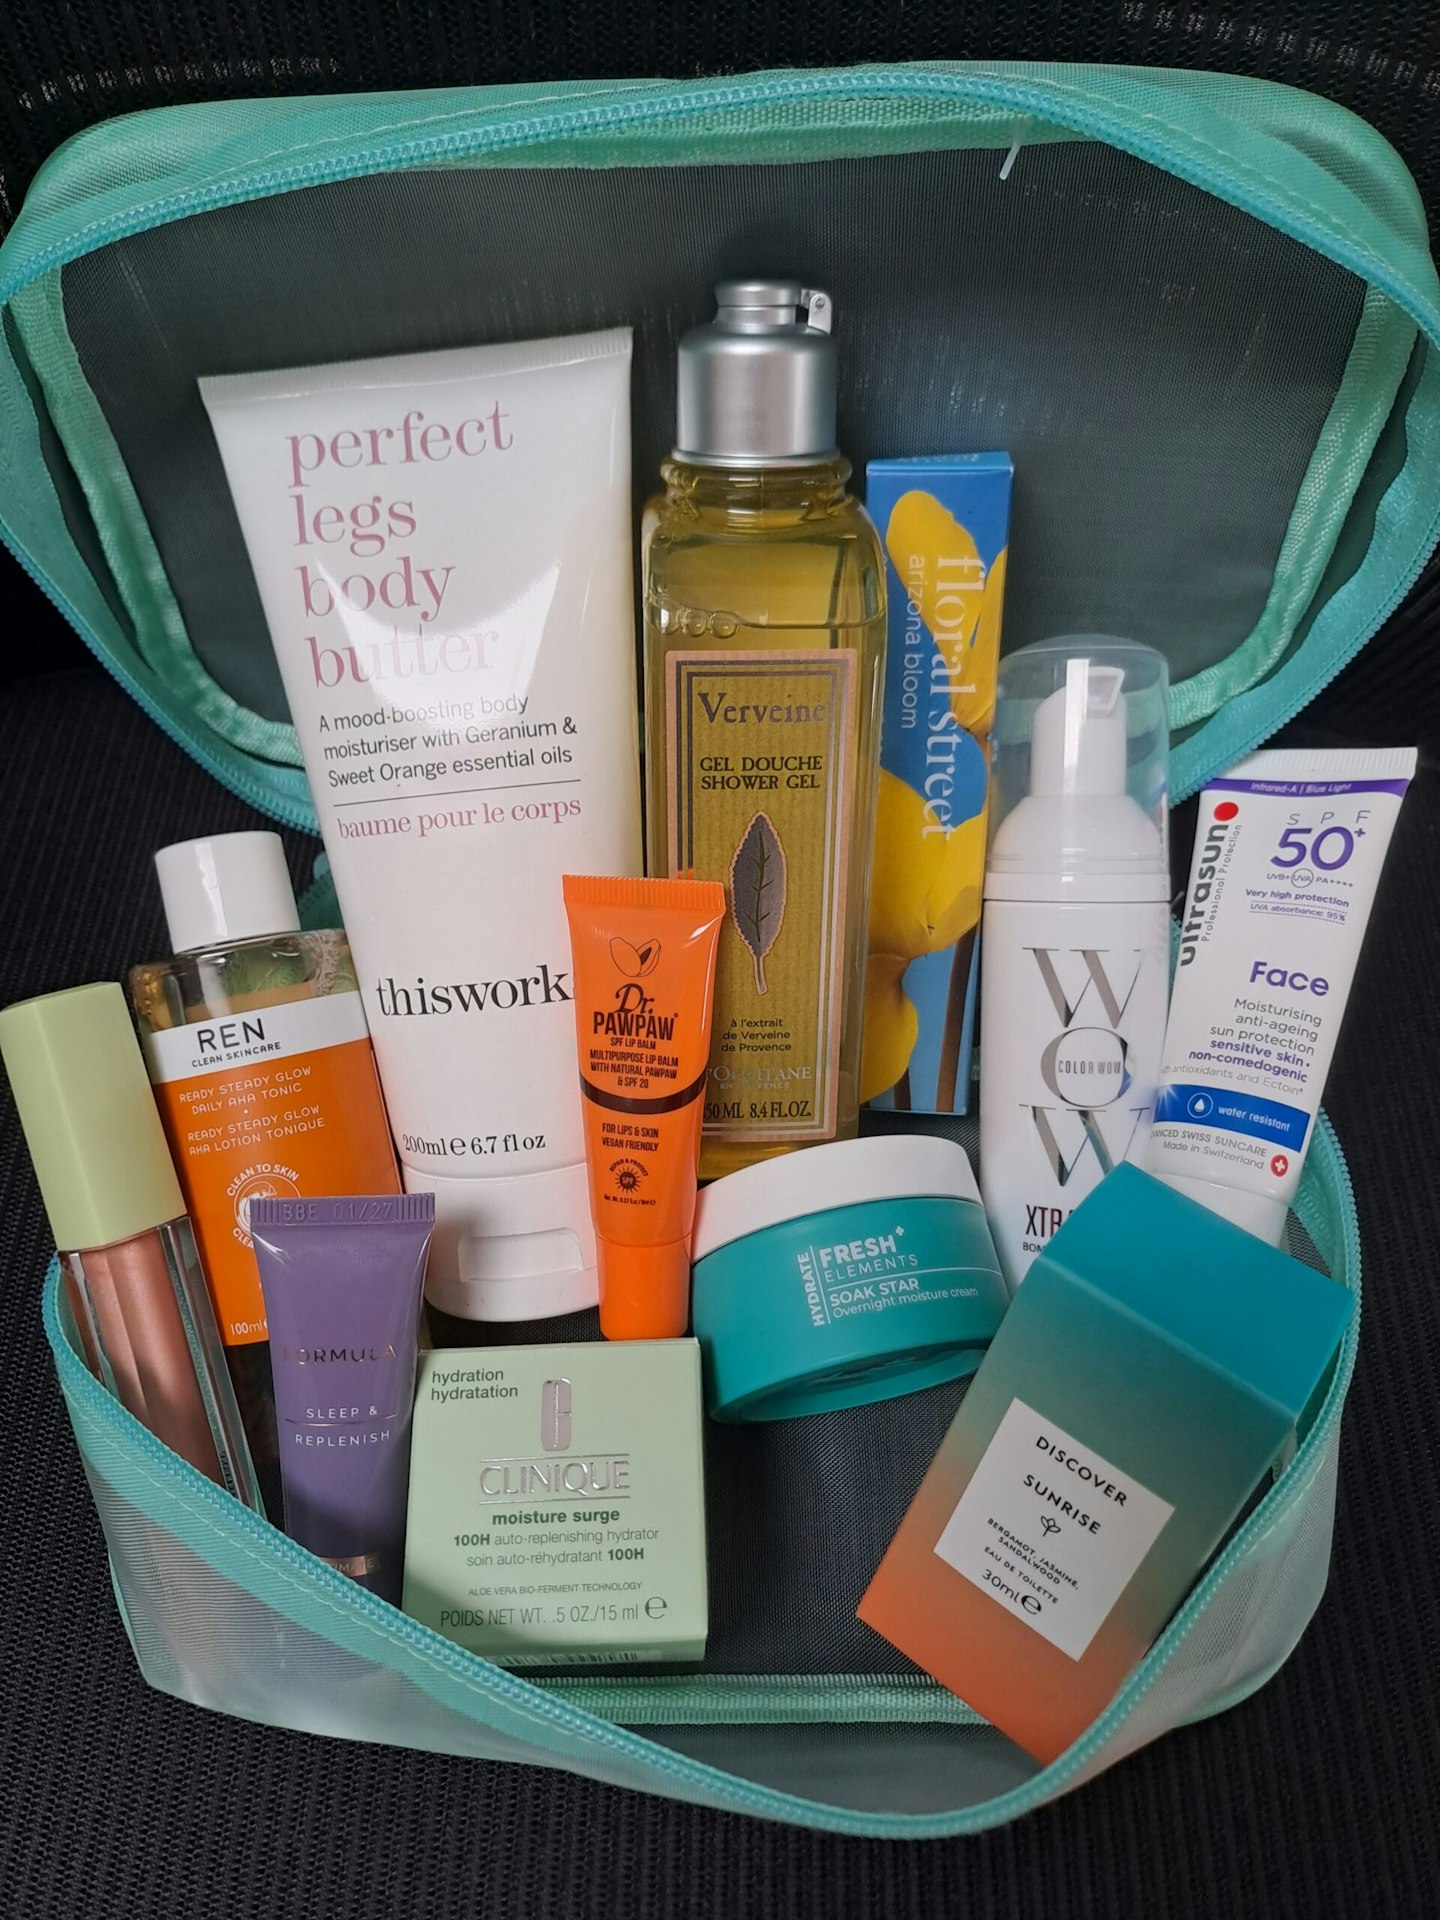 M&S Summer Beauty Bag with products